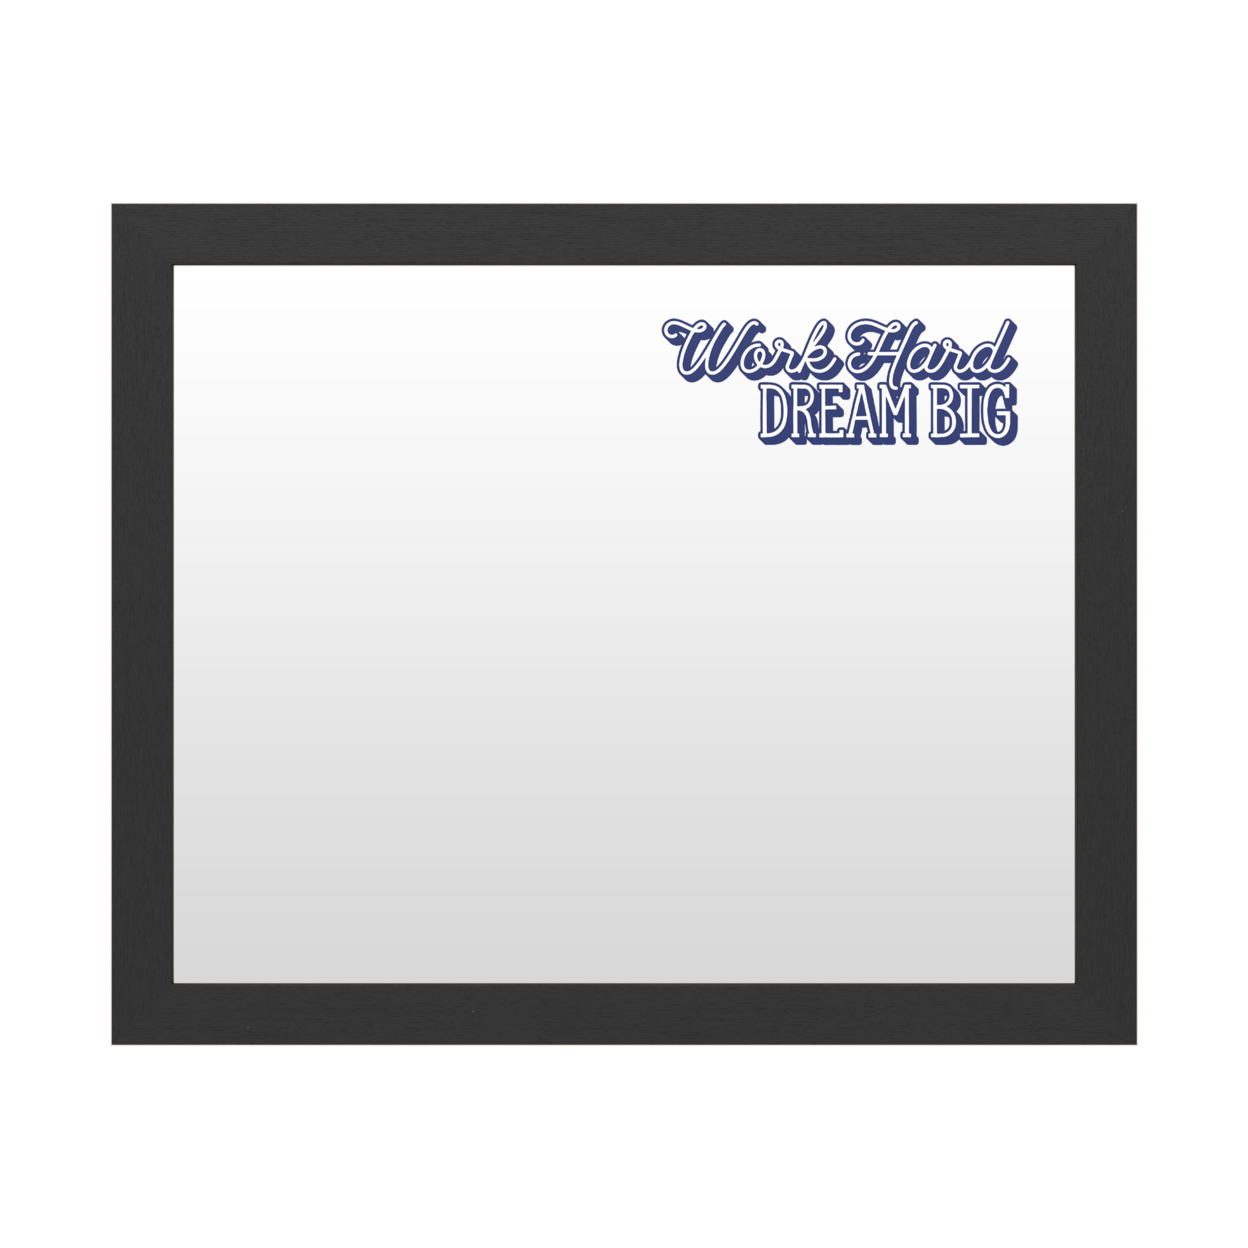 Dry Erase 16 X 20 Marker Board With Printed Artwork - Work Hard Dream Big Blue White Board - Ready To Hang